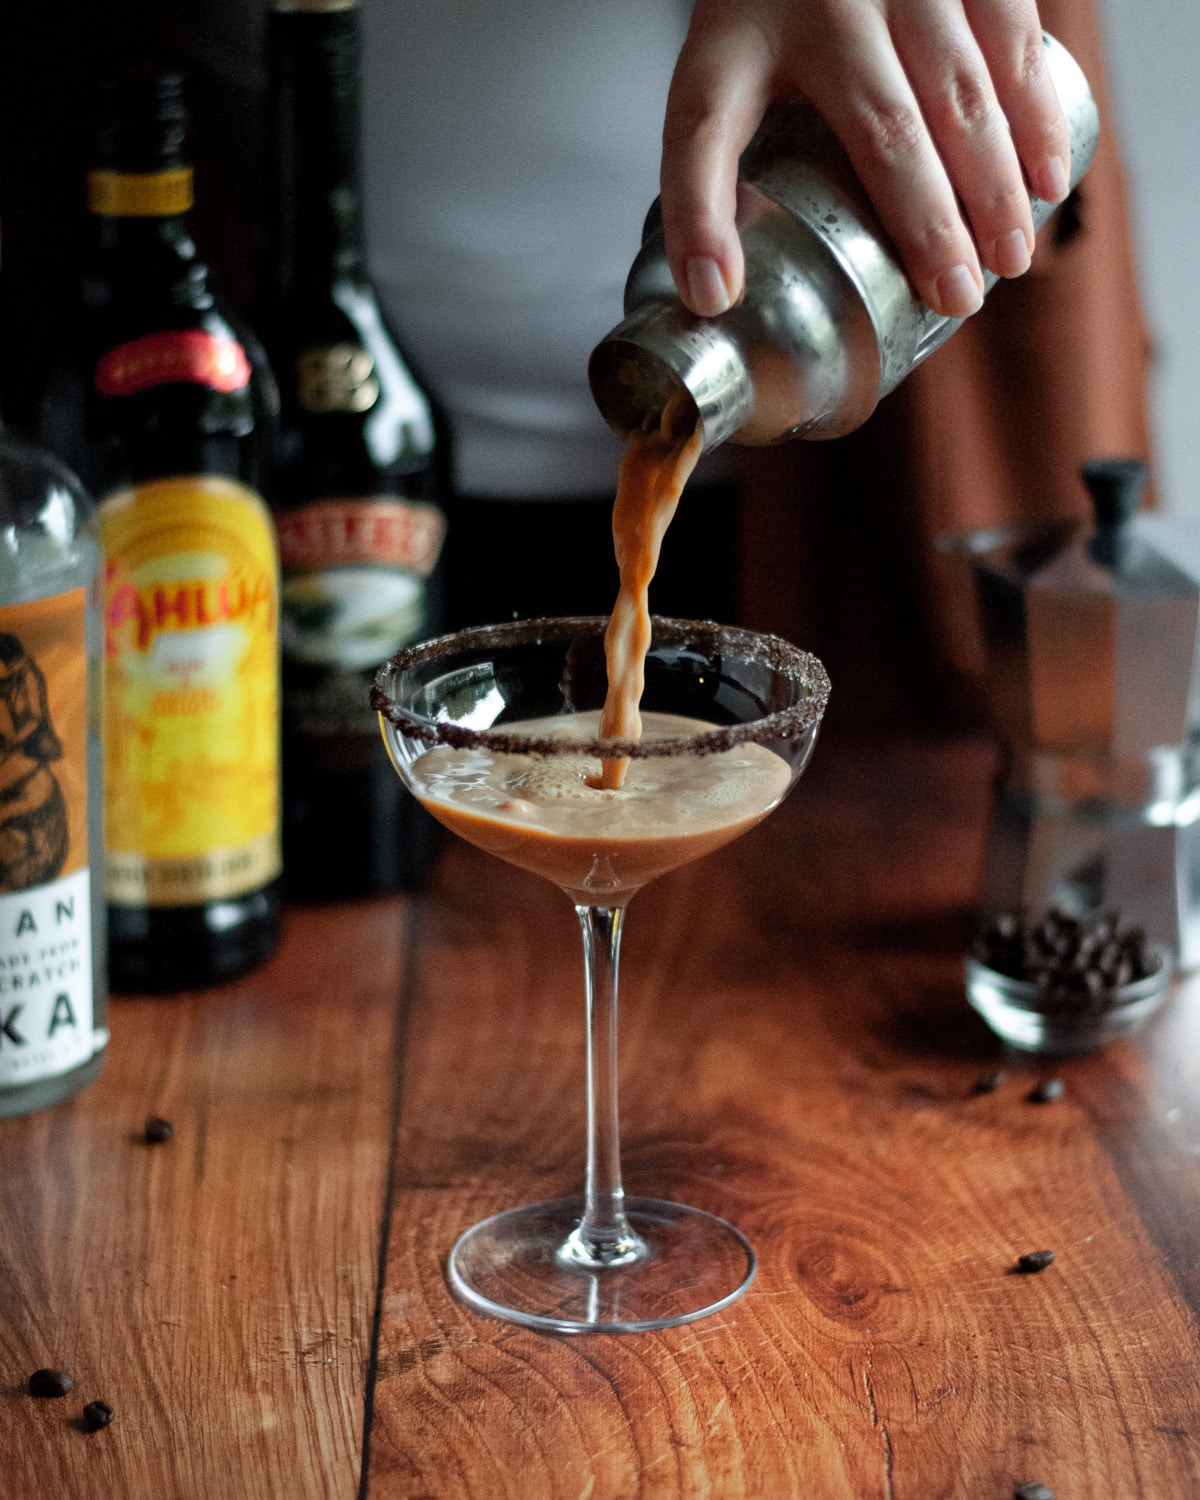 process shot of making an espresso martini with baileys. a person is pouring a freshly shaken cocktail into a coupe glass with a coffee-sugar rim. liquor bottles, a moka pot, and coffee beans sit in the background.